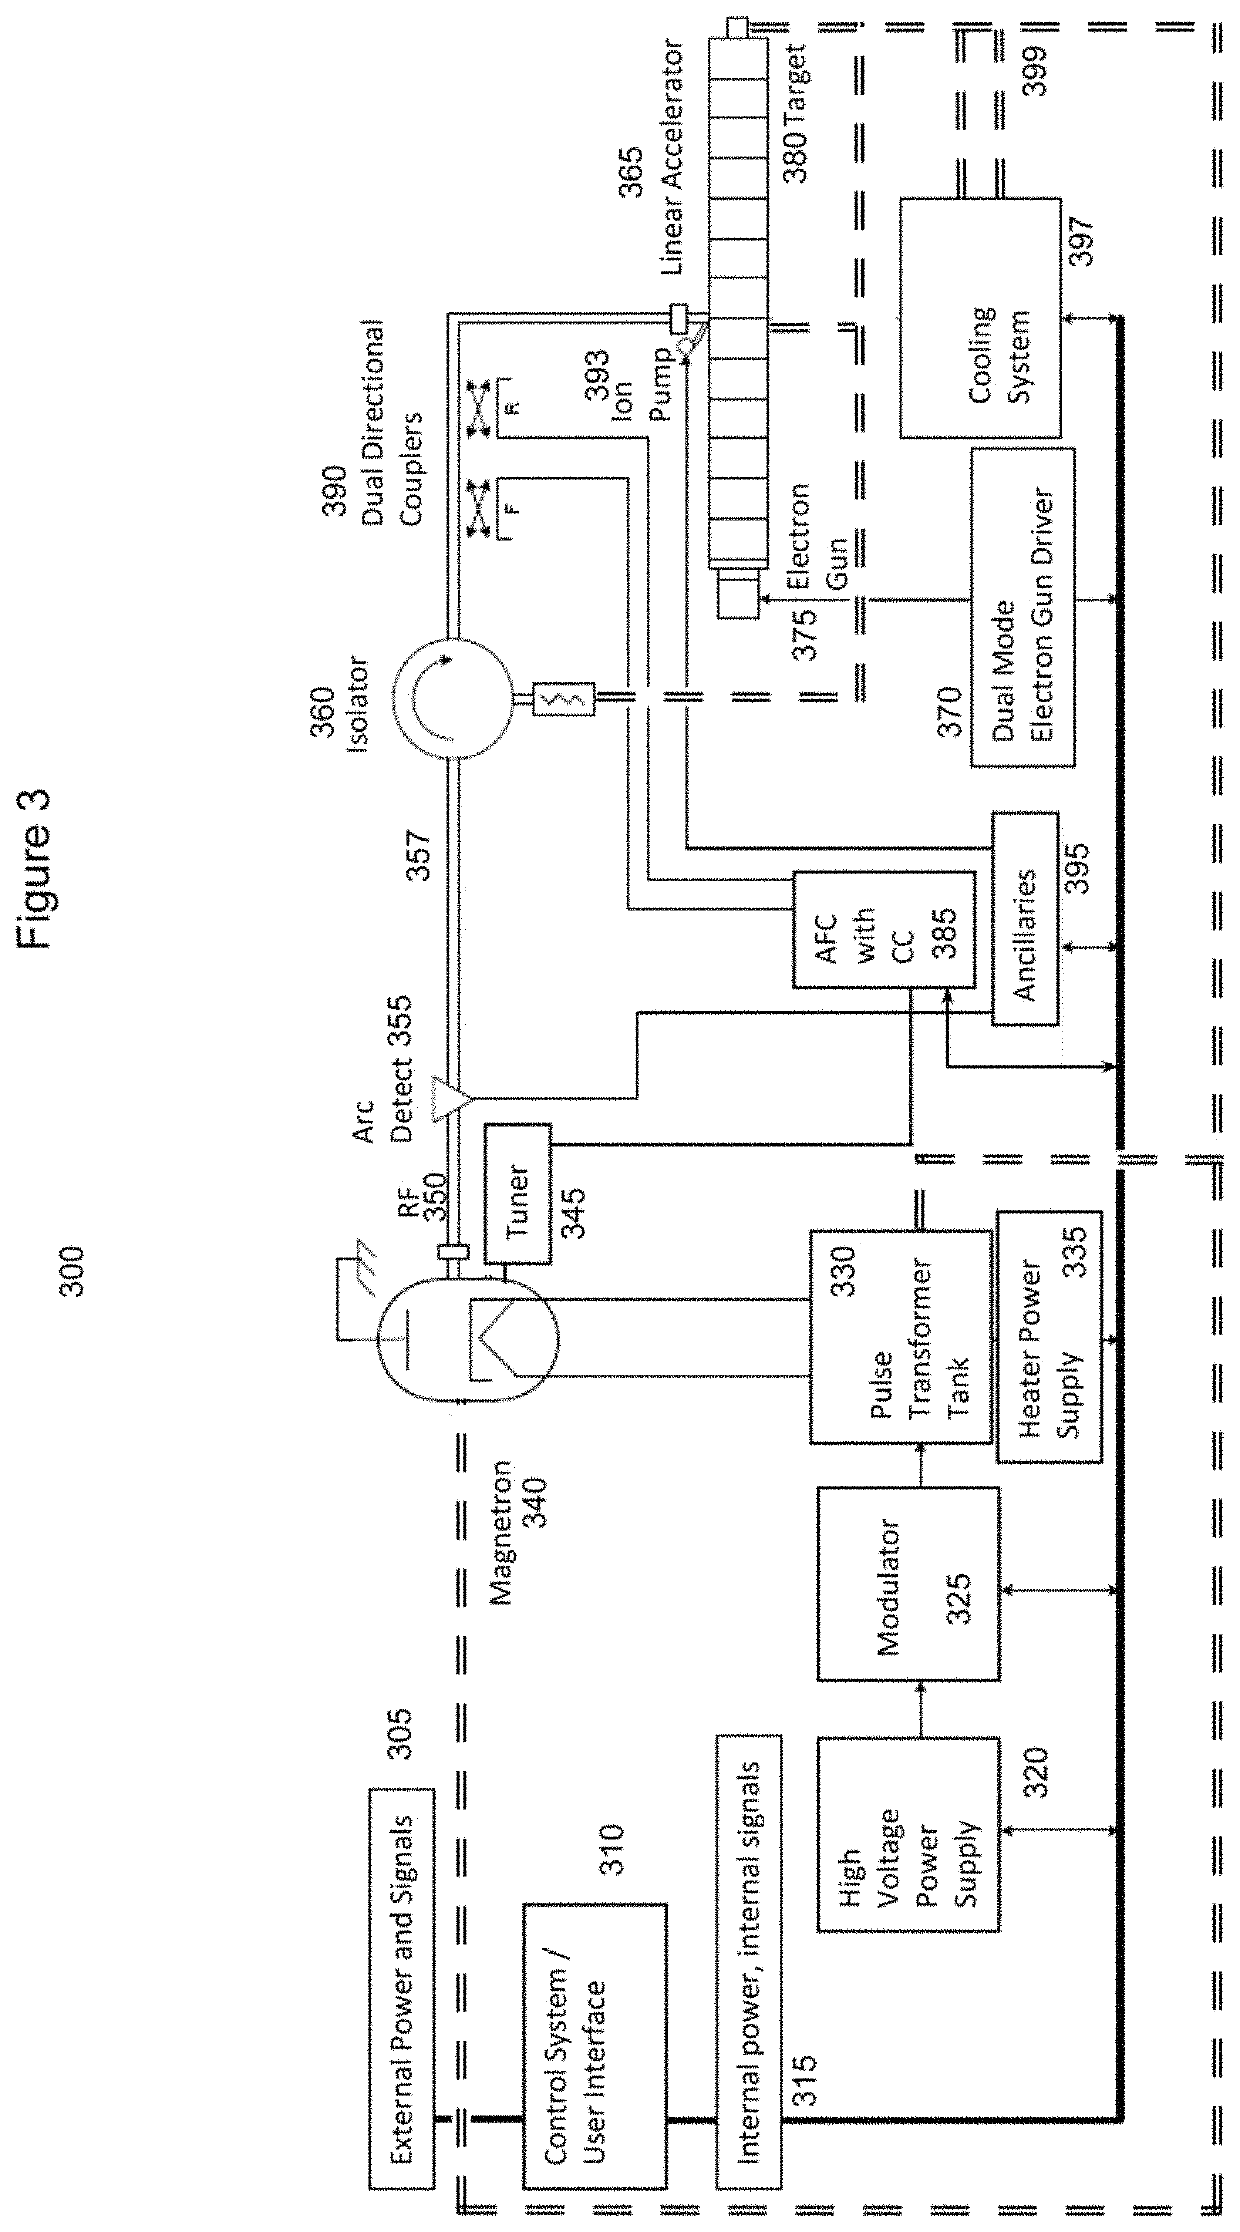 Self-shielded image guided radiation oncology system